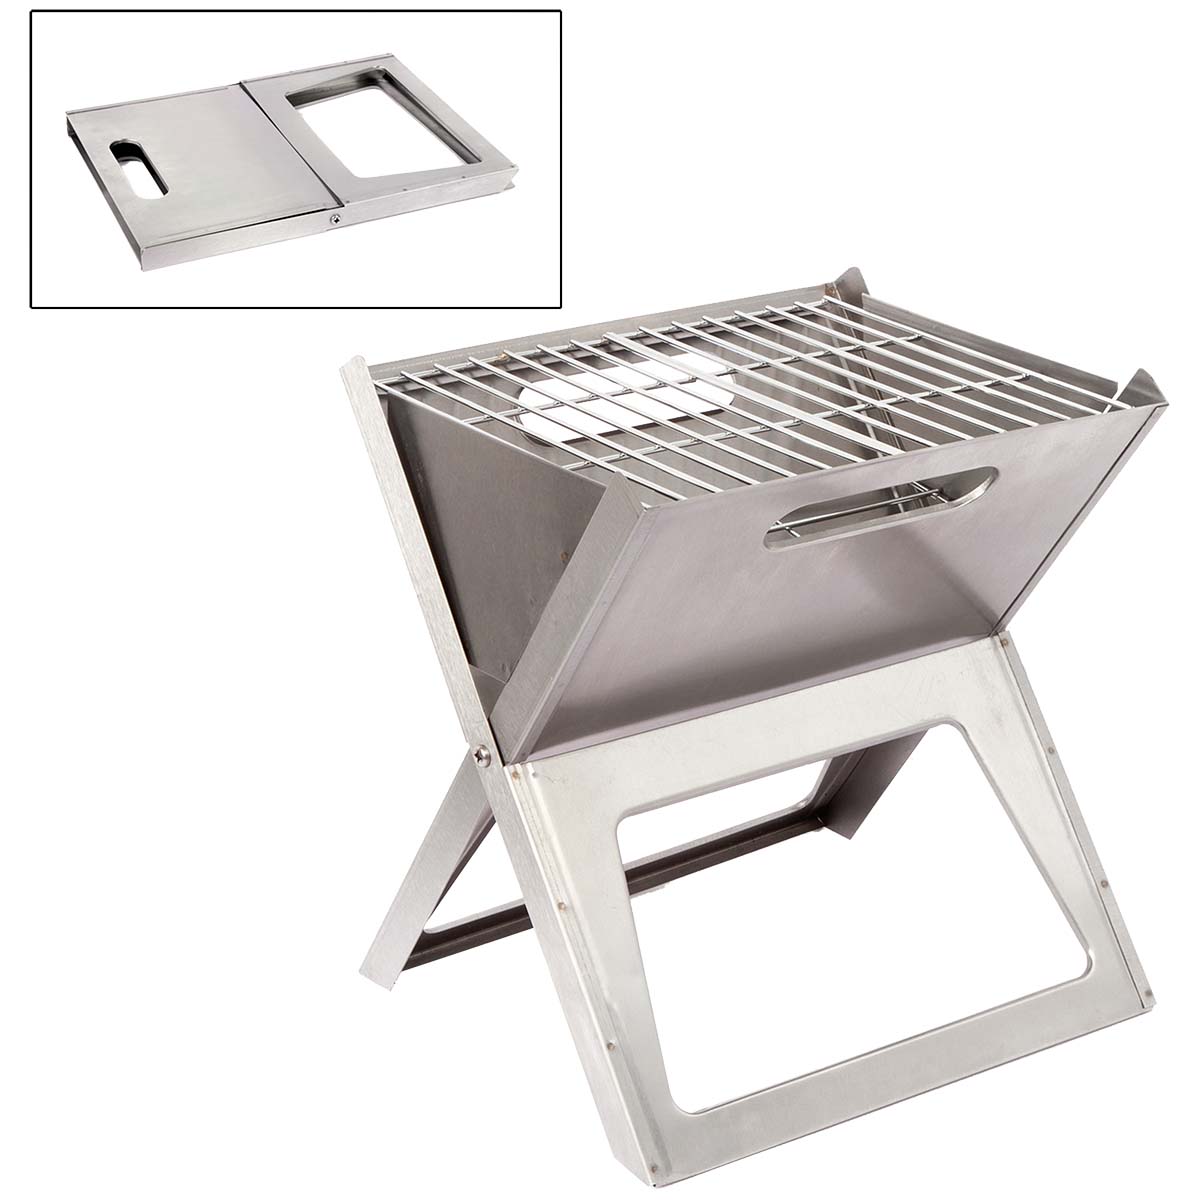 8108347 A very compact, fold-flat stainless steel charcoal grill. This durable barbecue grill is quick and easy to set up and then usable as a barbecue or fire pit. This dual function, combined with its compactness, makes this an ideal travel barbecue. Cooking area: 24x27 centimetres.